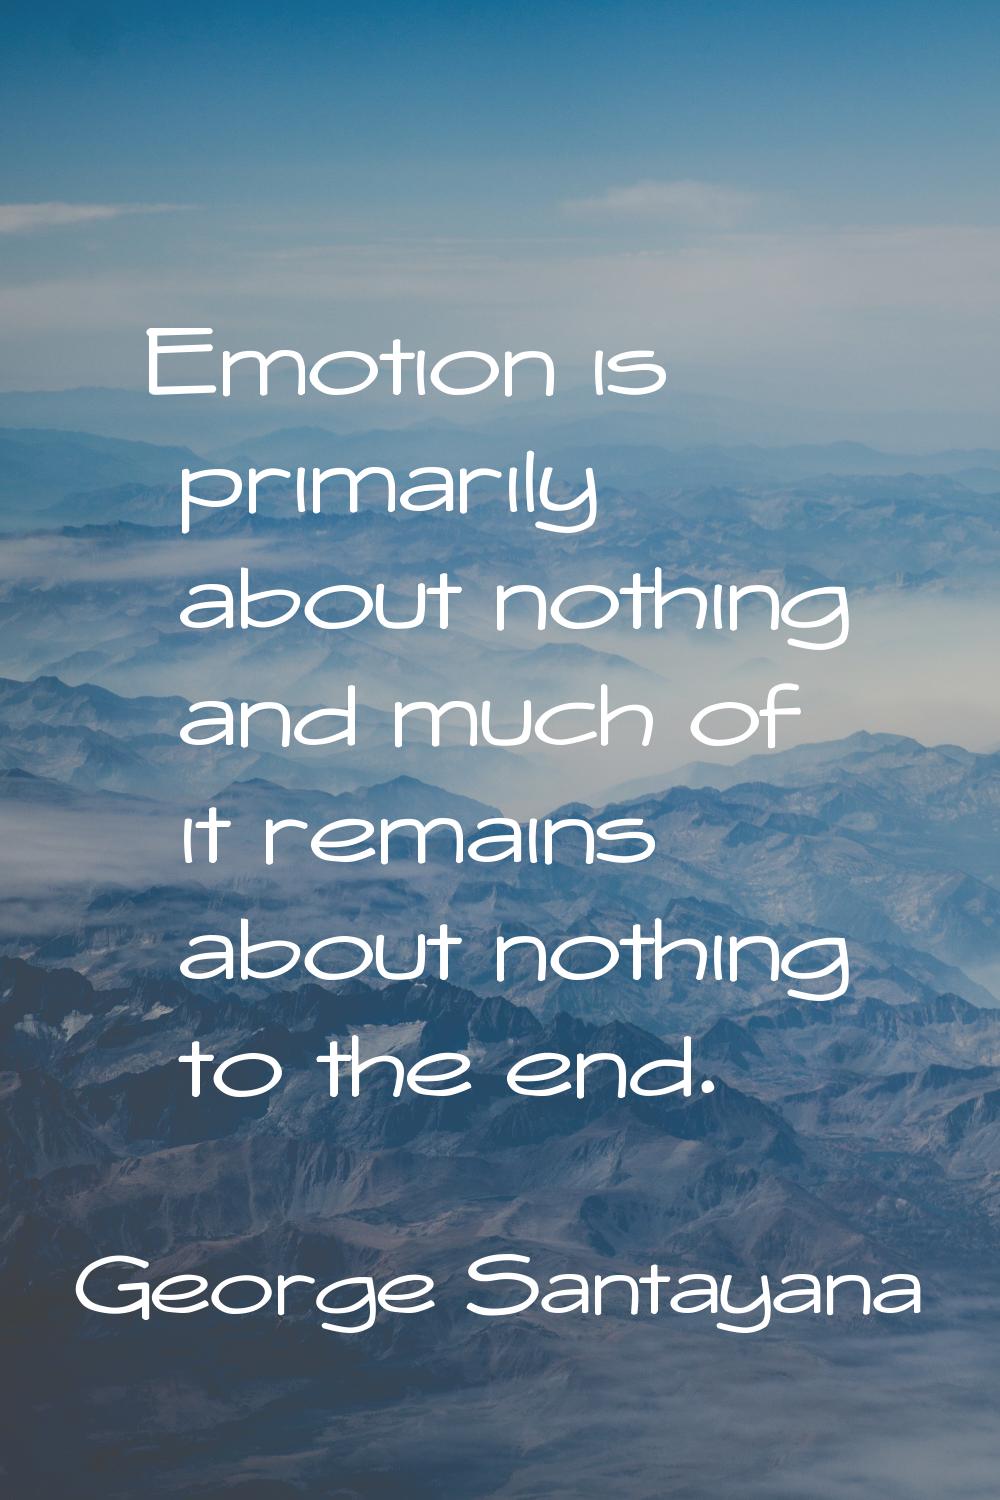 Emotion is primarily about nothing and much of it remains about nothing to the end.